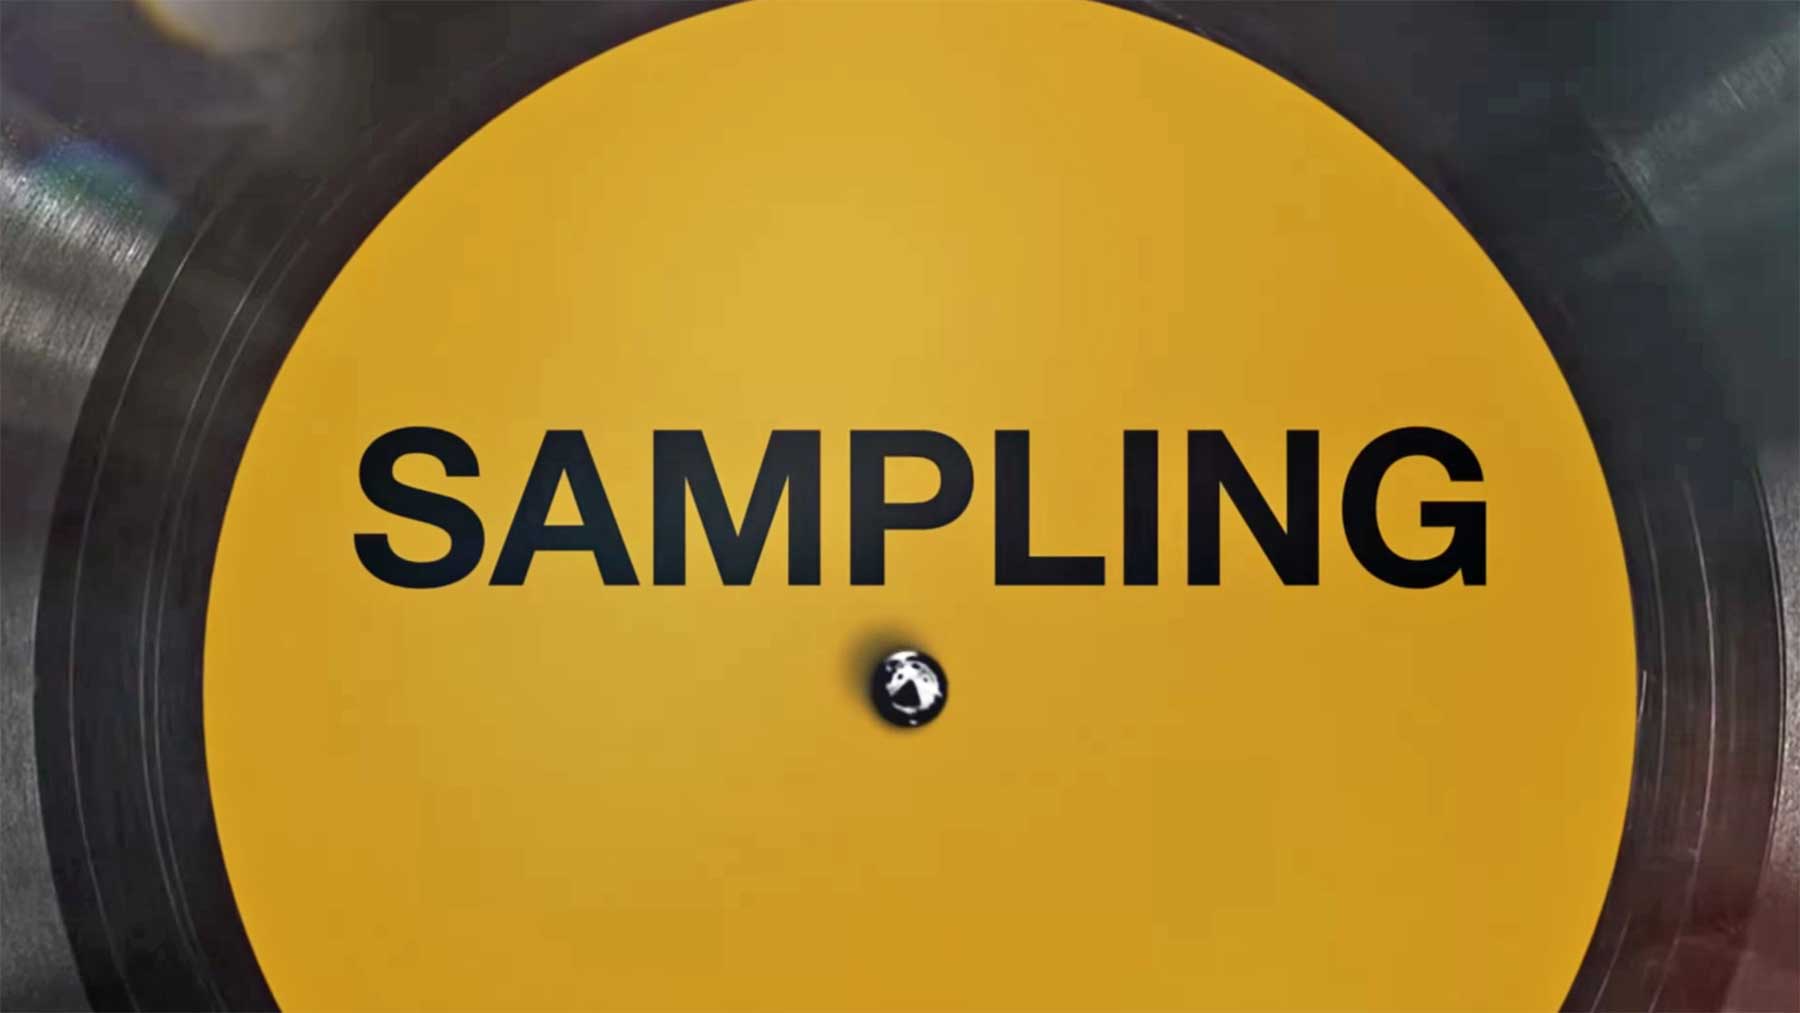 Everything is a Remix - Part 1: Samples (2021er Version) everything-is-a-remix-sampling-2021 